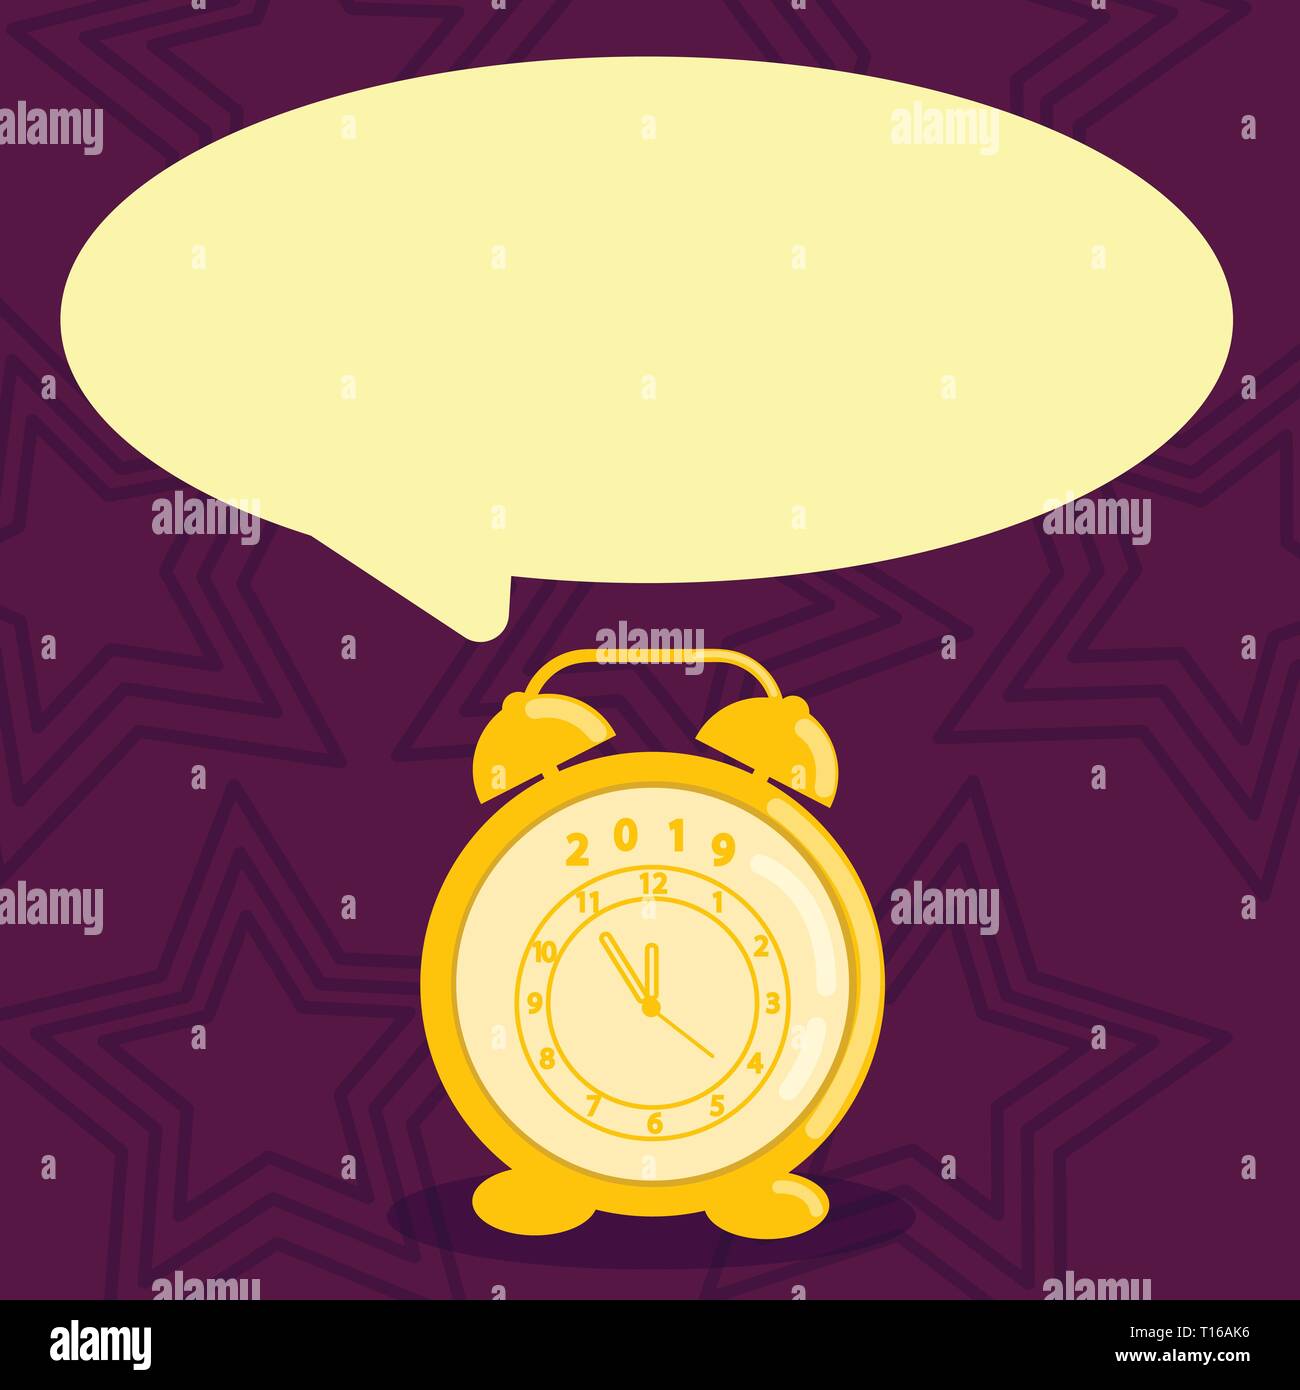 Round Blank Speech Balloon in Pastel Shade and Colorful Analog Alarm Clock Design business concept Empty copy text for Web banners promotional materia Stock Vector